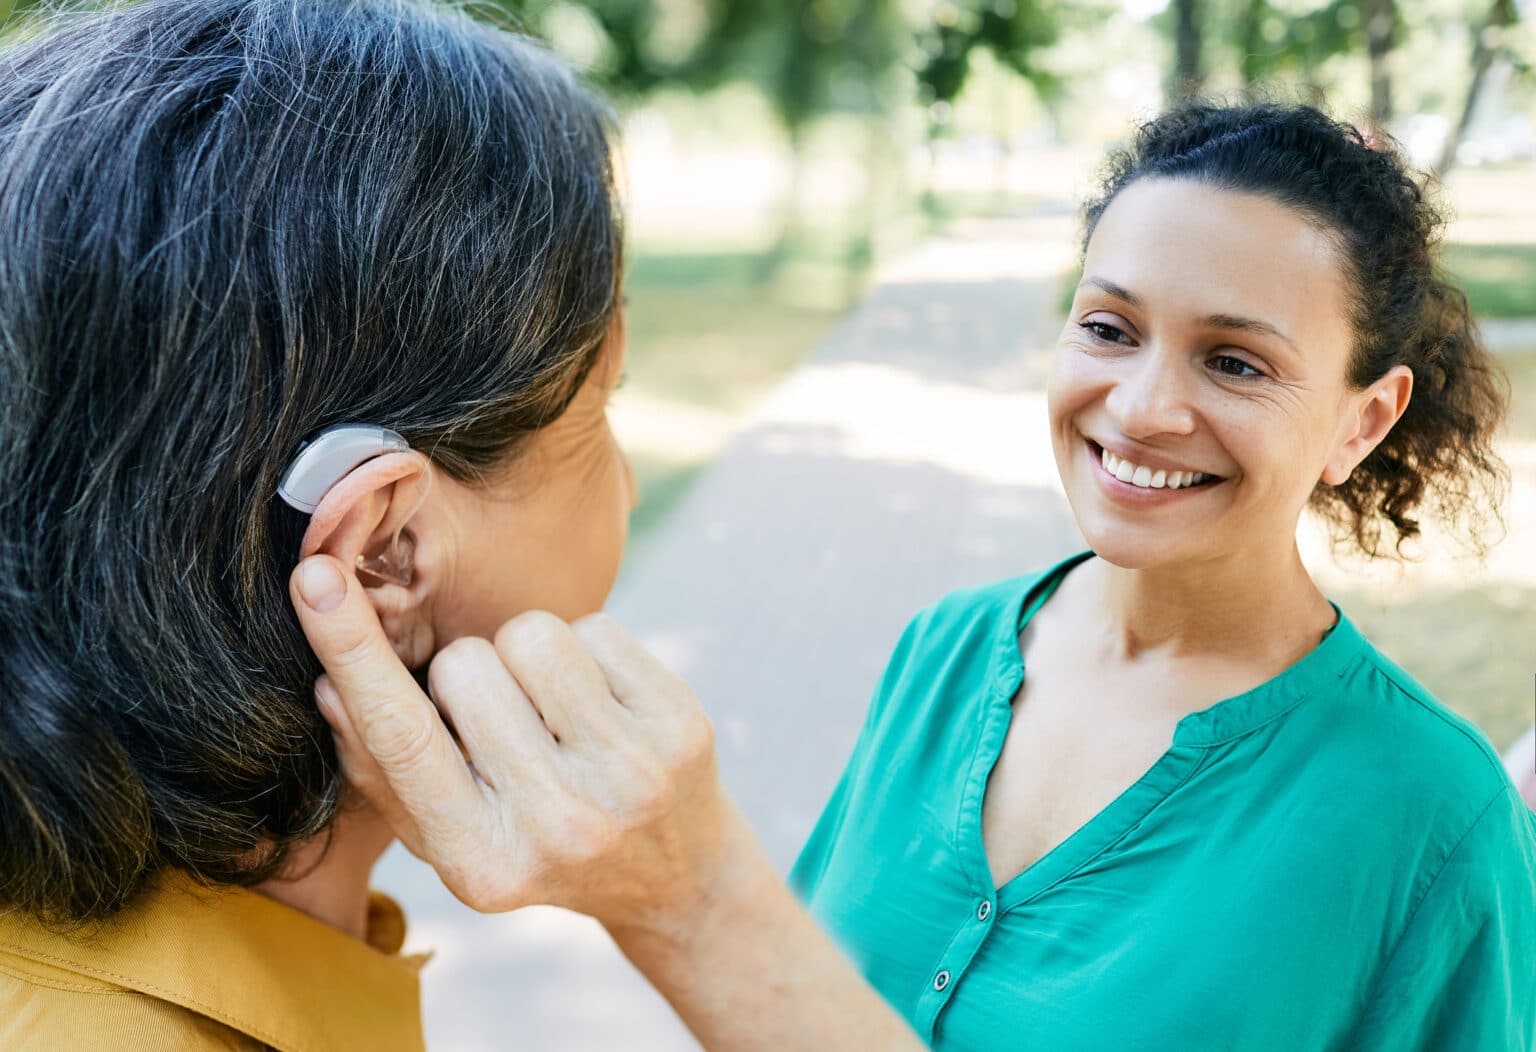 Woman with hearing aid chats with her friend outside.